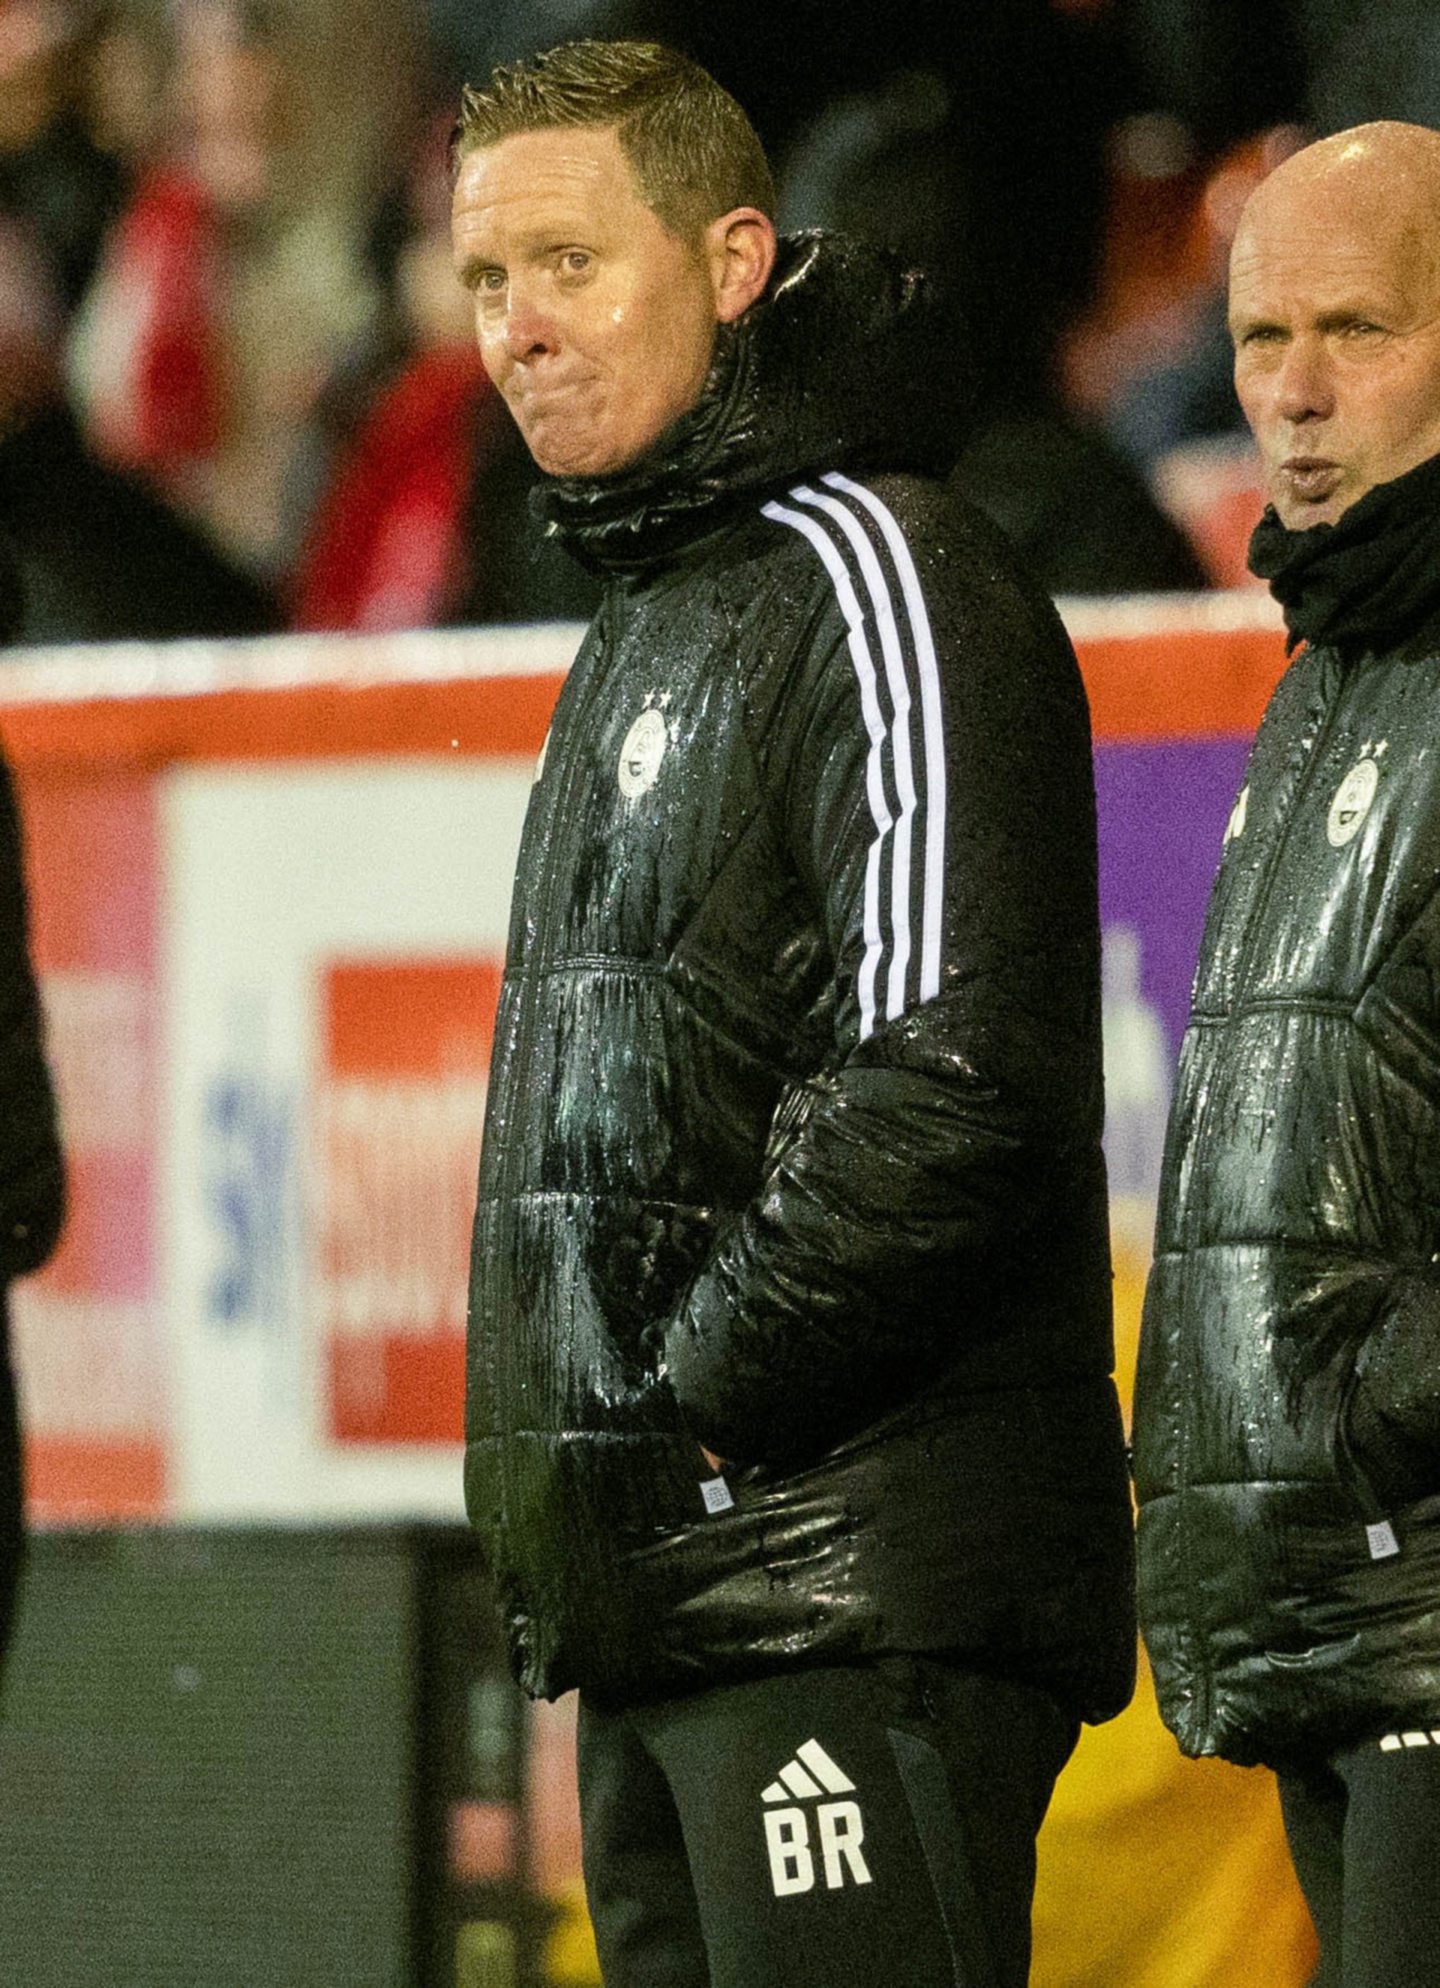 Aberdeen manager Barry Robson looks dejected during the 3-0 loss to St Mirren.